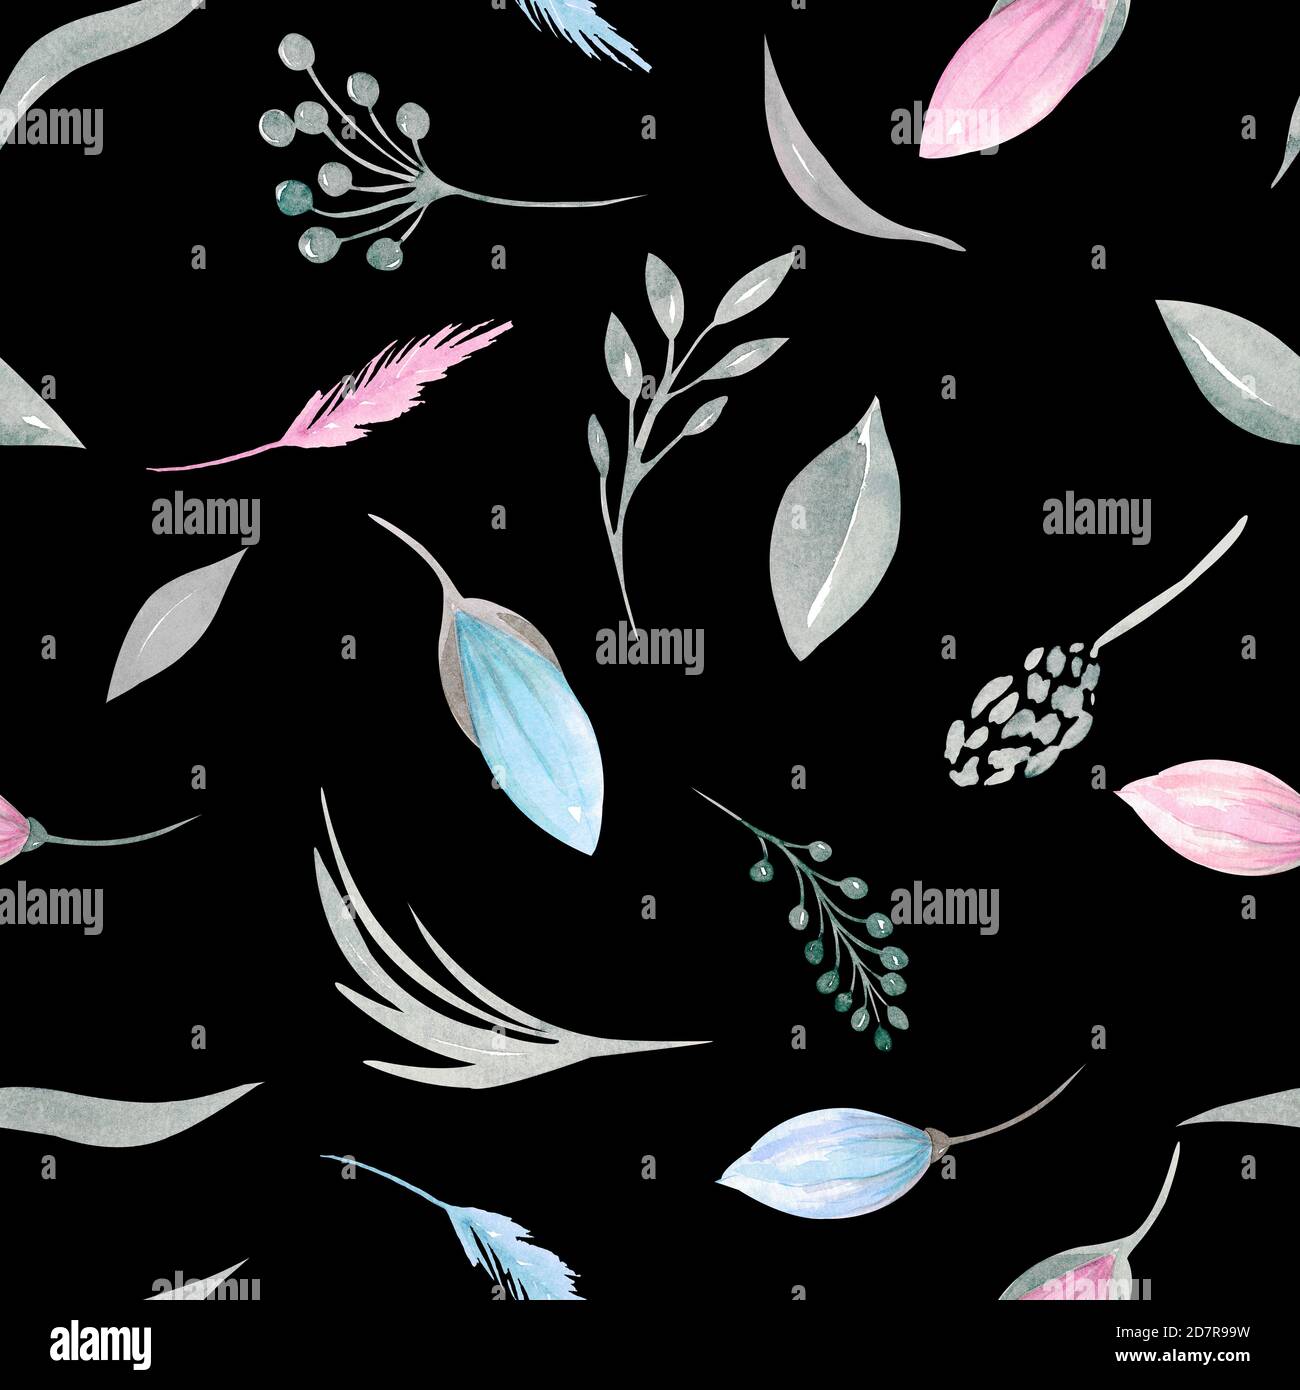 Seamless pattern of floral elements. Pink and blue tulips, spring greenery, foliage, branches on a black background Stock Photo